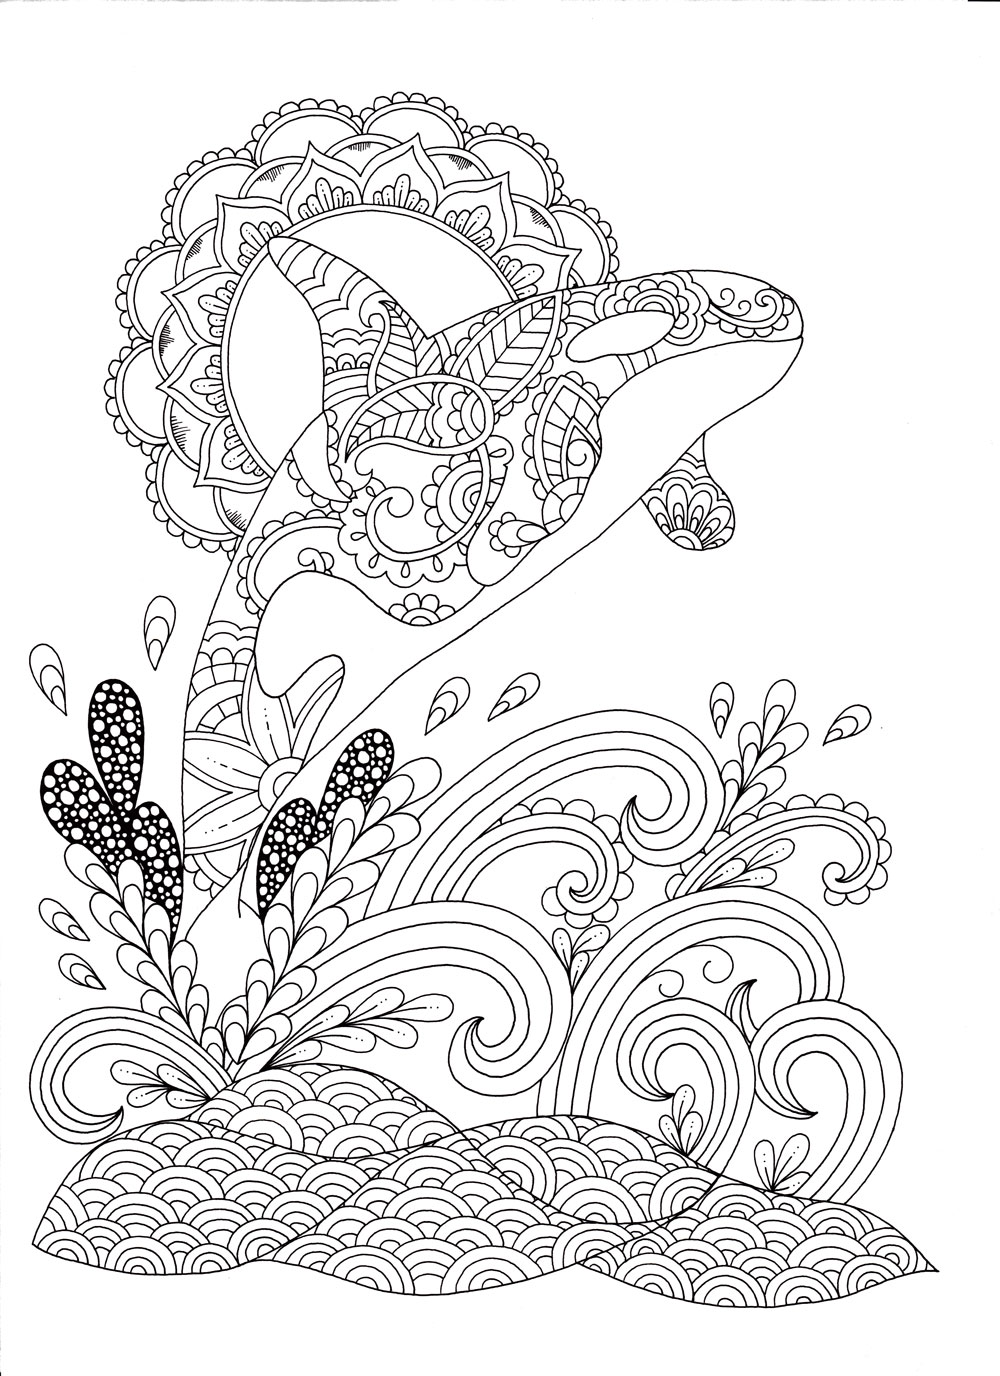 Download Benefits Of Stress Relieving Adult Coloring Books